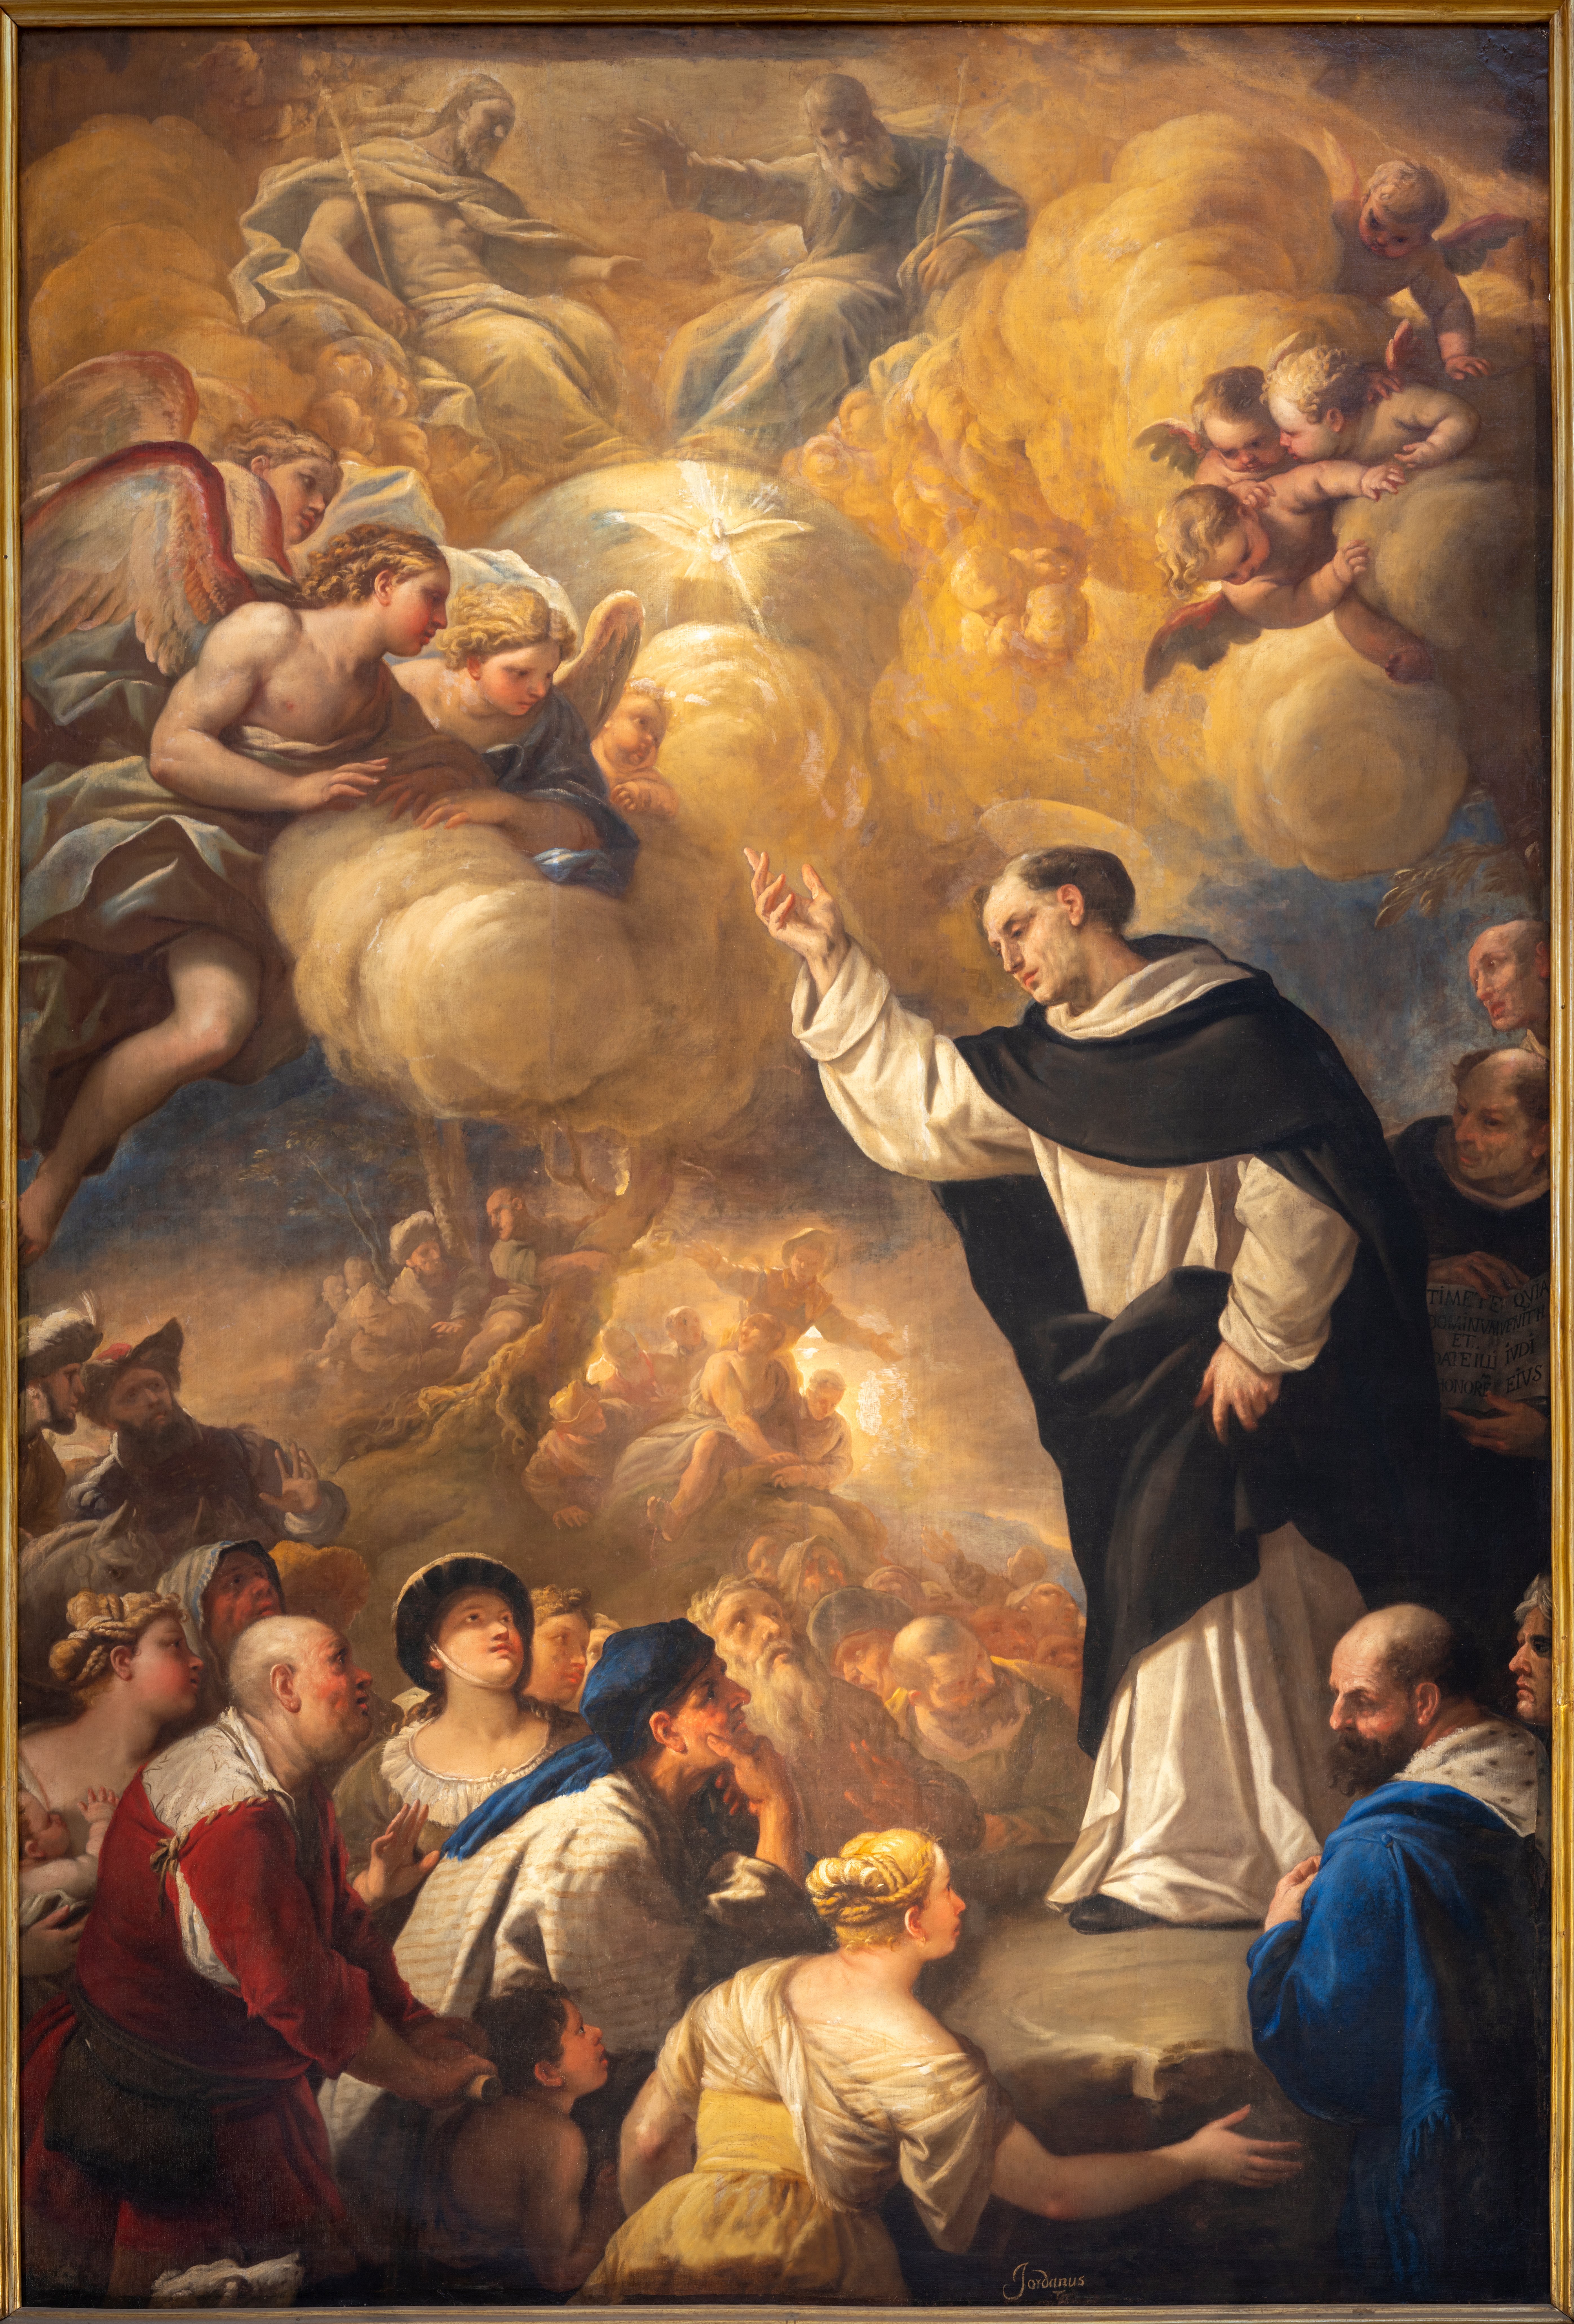 St. Vincent Ferrer The Angel of the Apocalypse Preaching about the End Times 